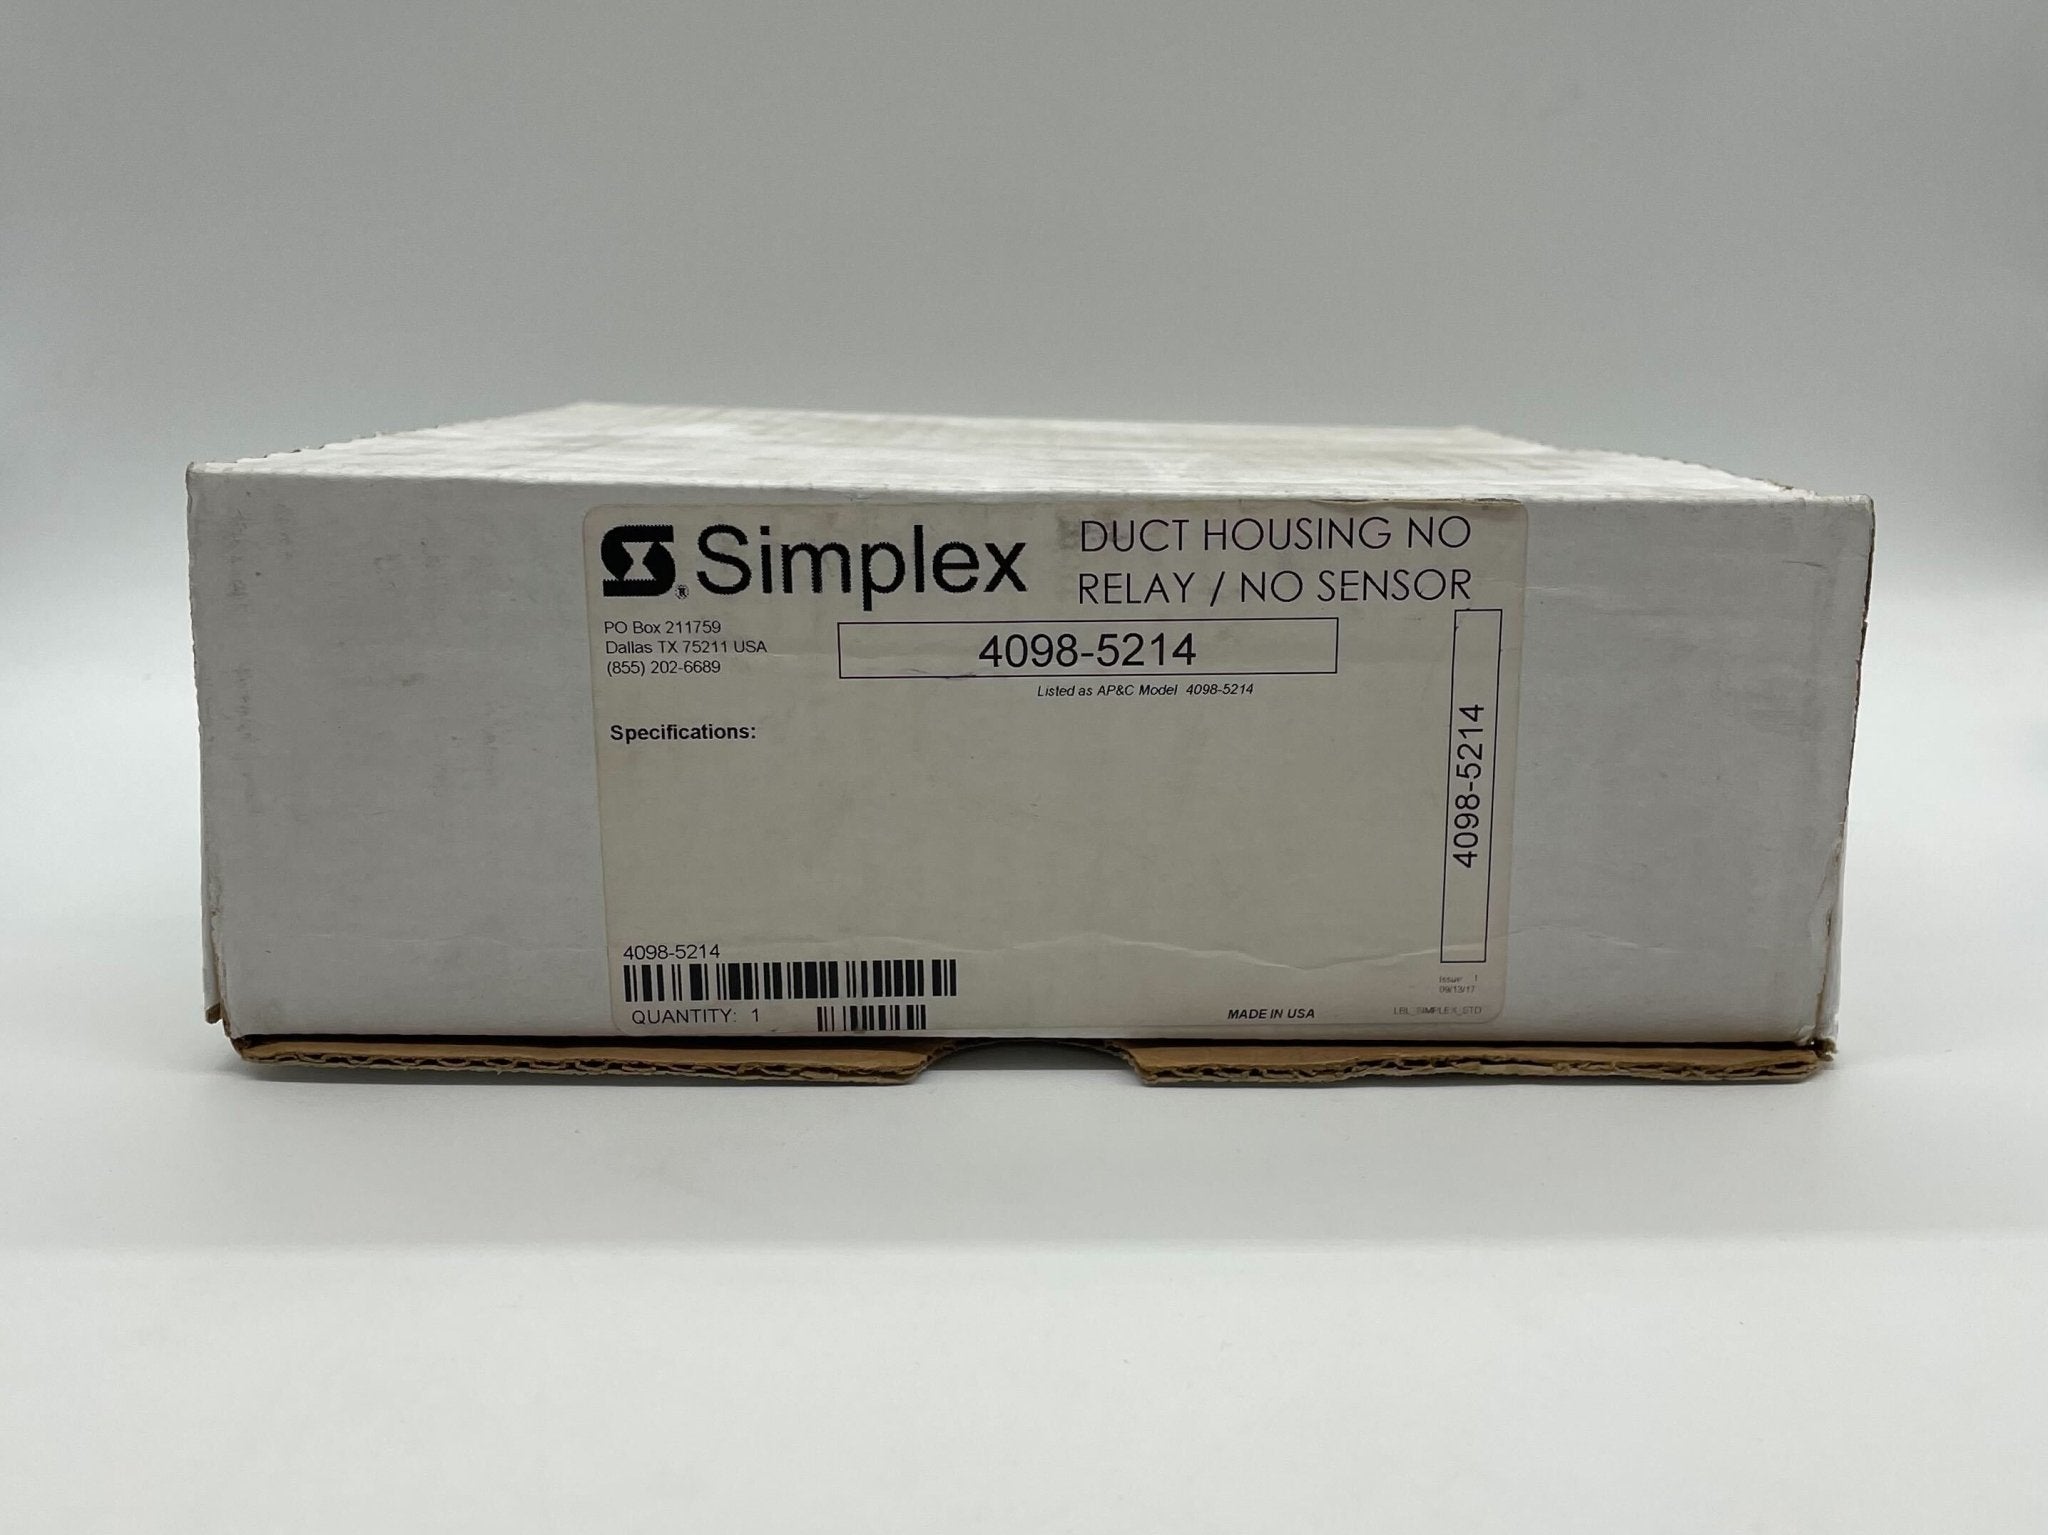 Simplex 4098-5214 Duct Housing No Relay - The Fire Alarm Supplier